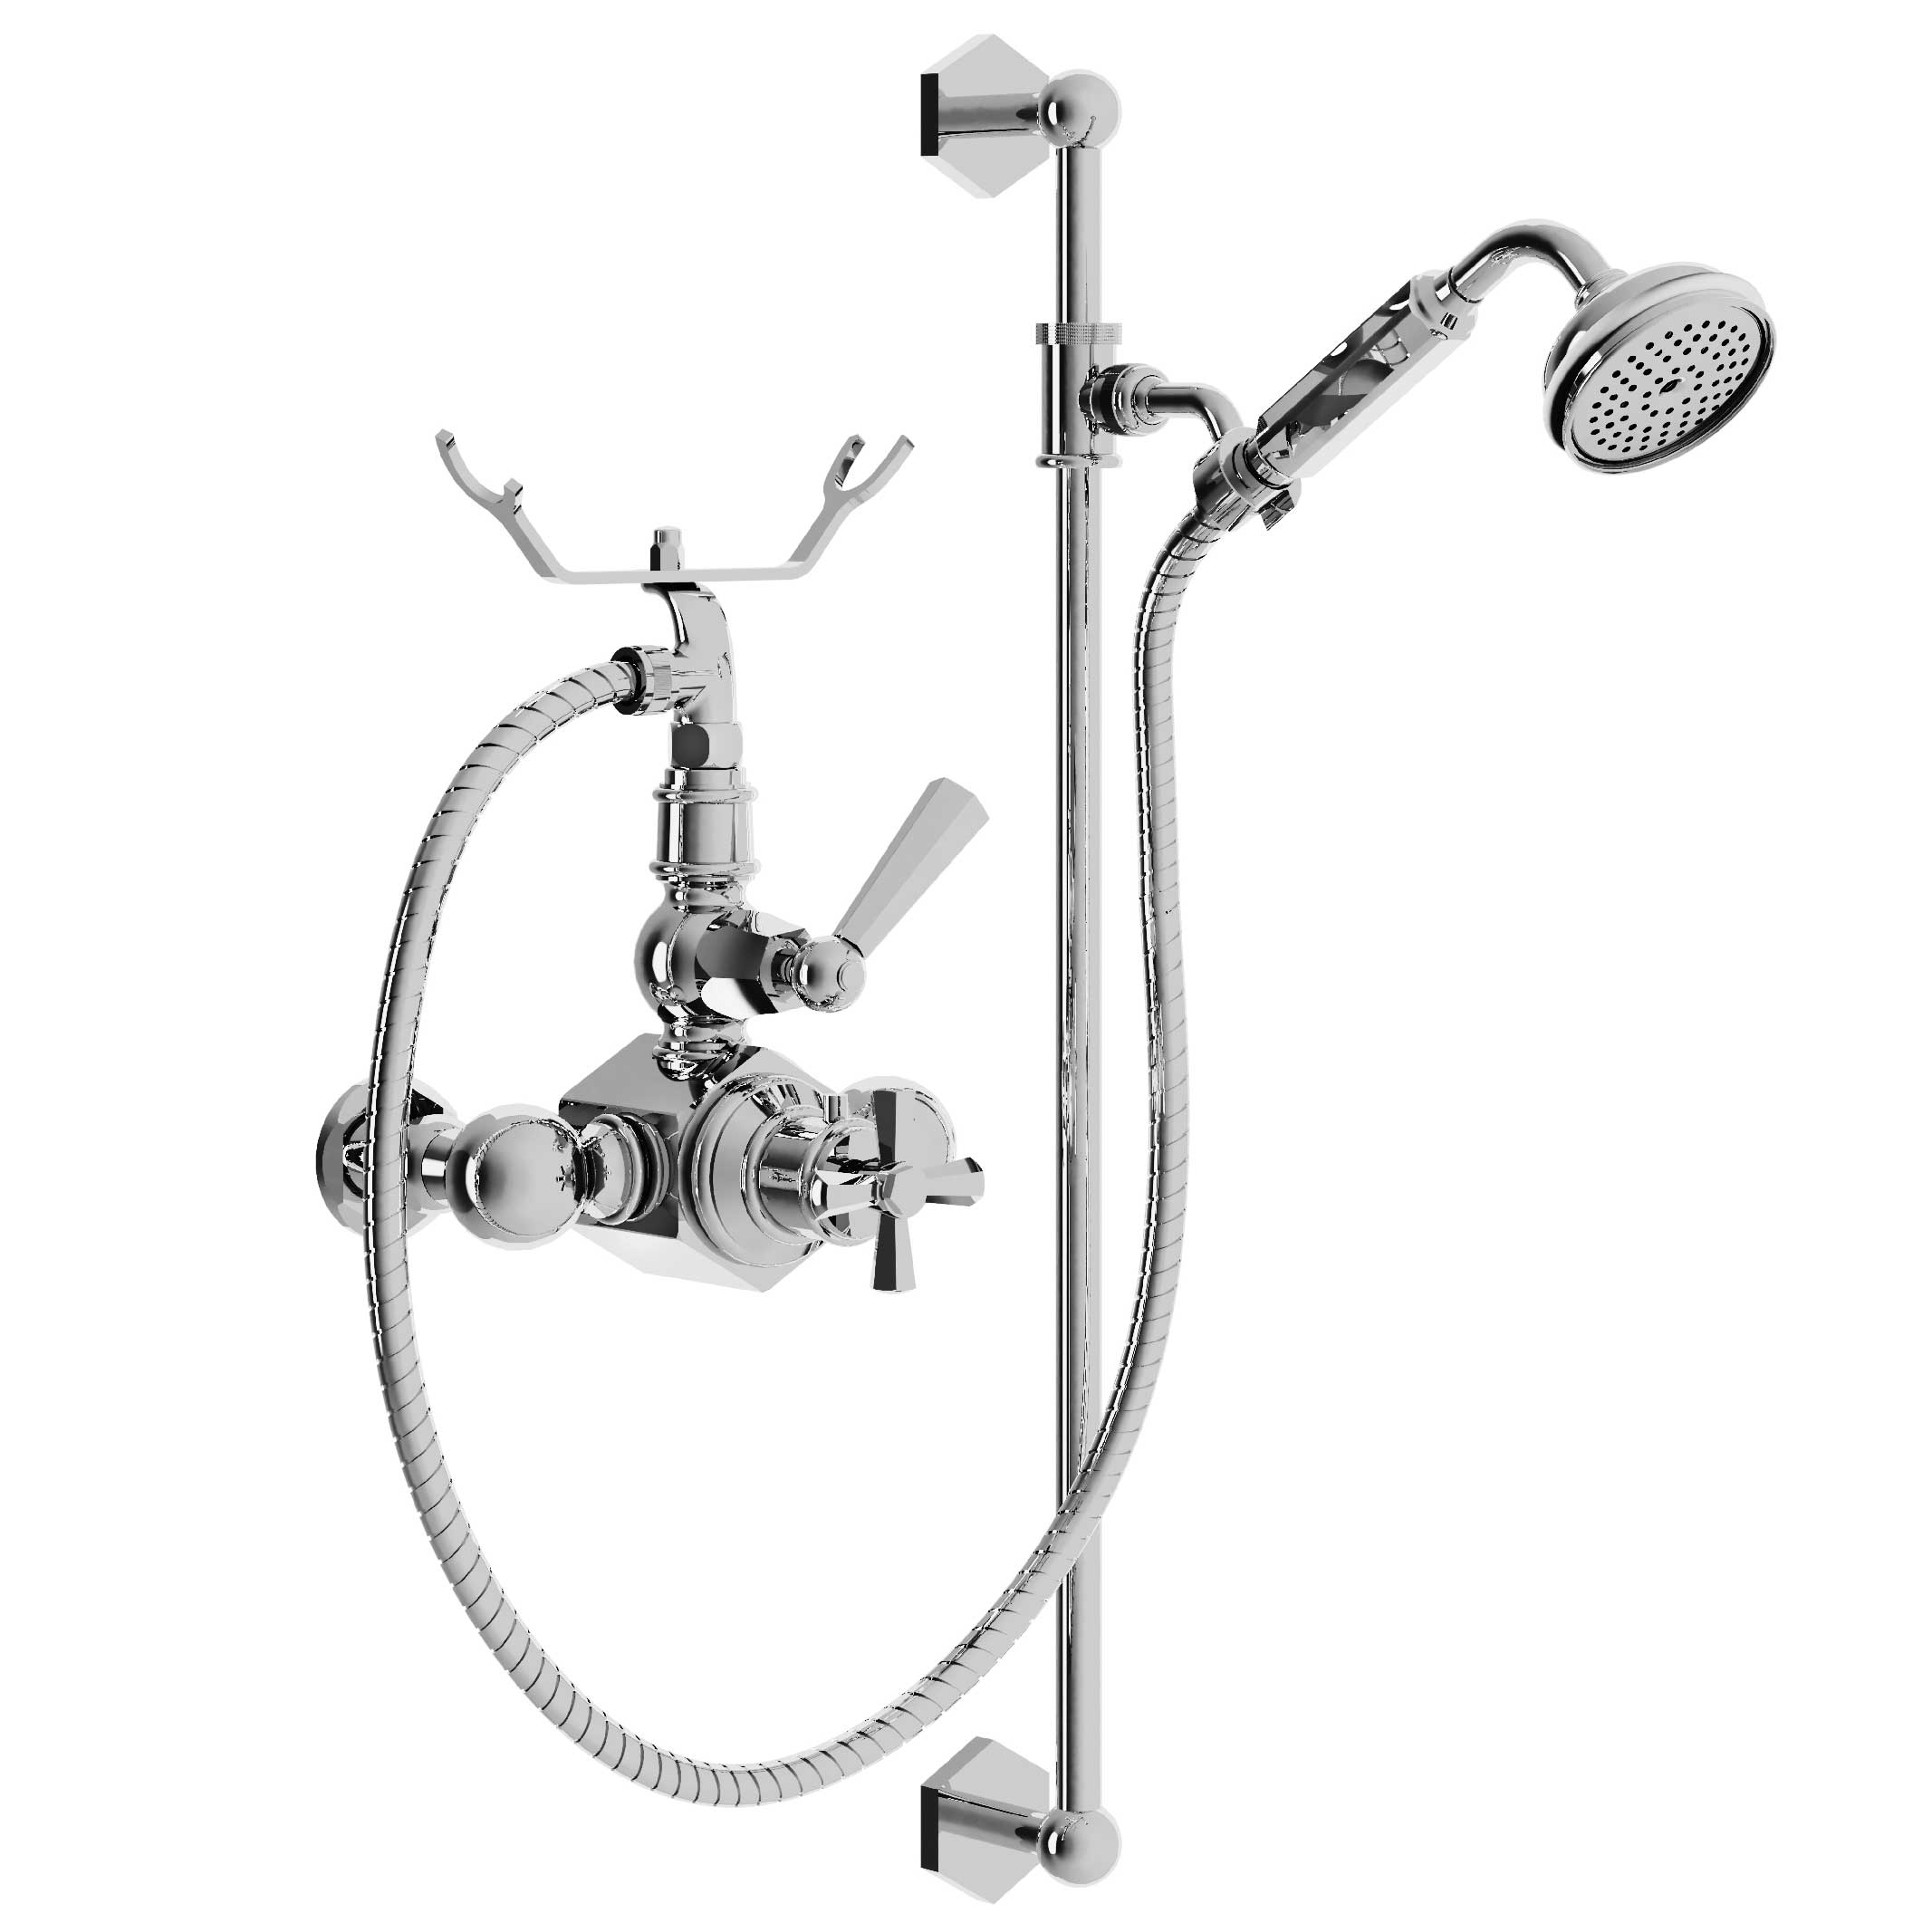 M13-2202T Mitigeur thermo. douche, coulidouche